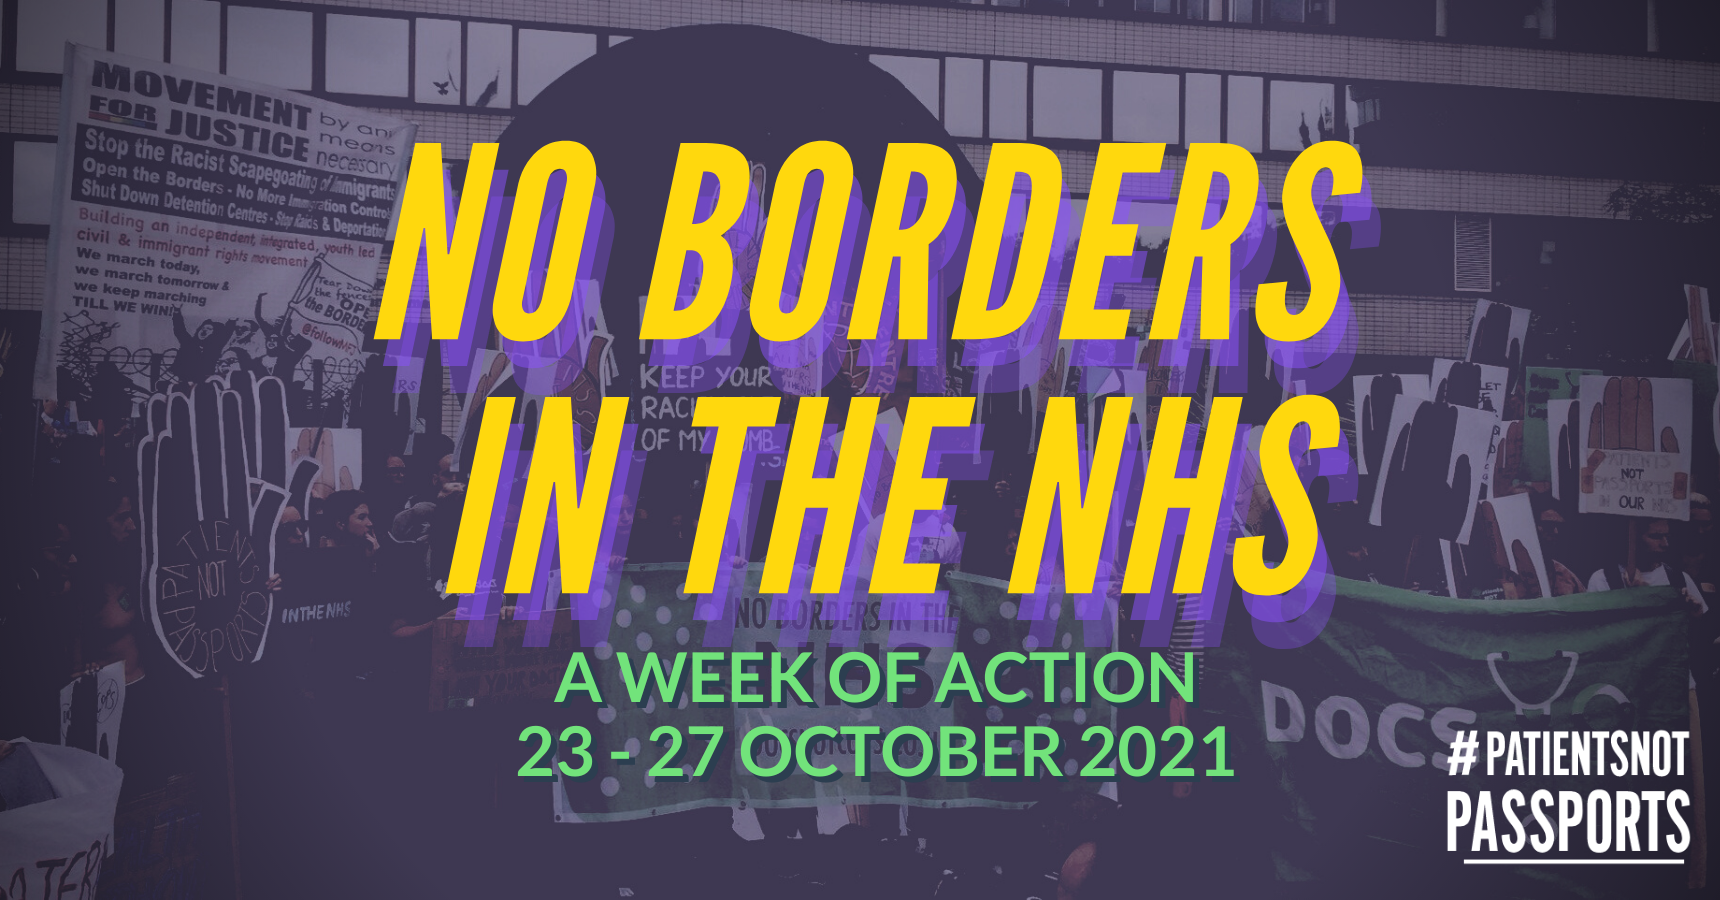 No Borders in the NHS! Week of Action, 23-27 October